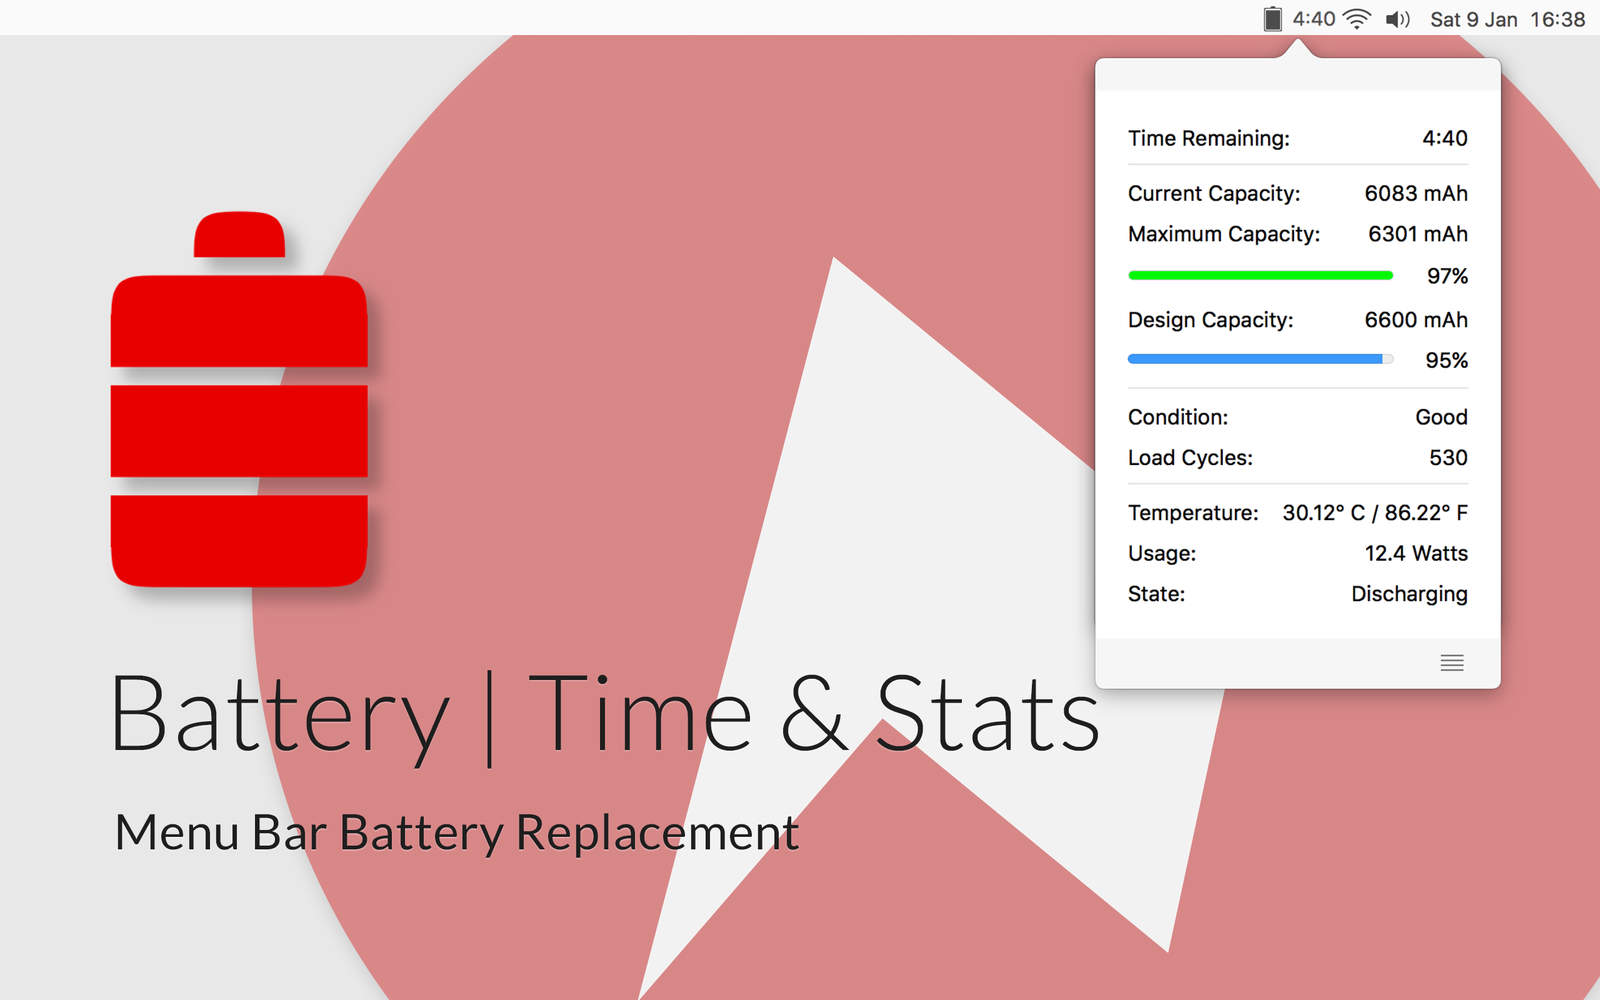 Battery Time & Stats 1.1 : Main Window